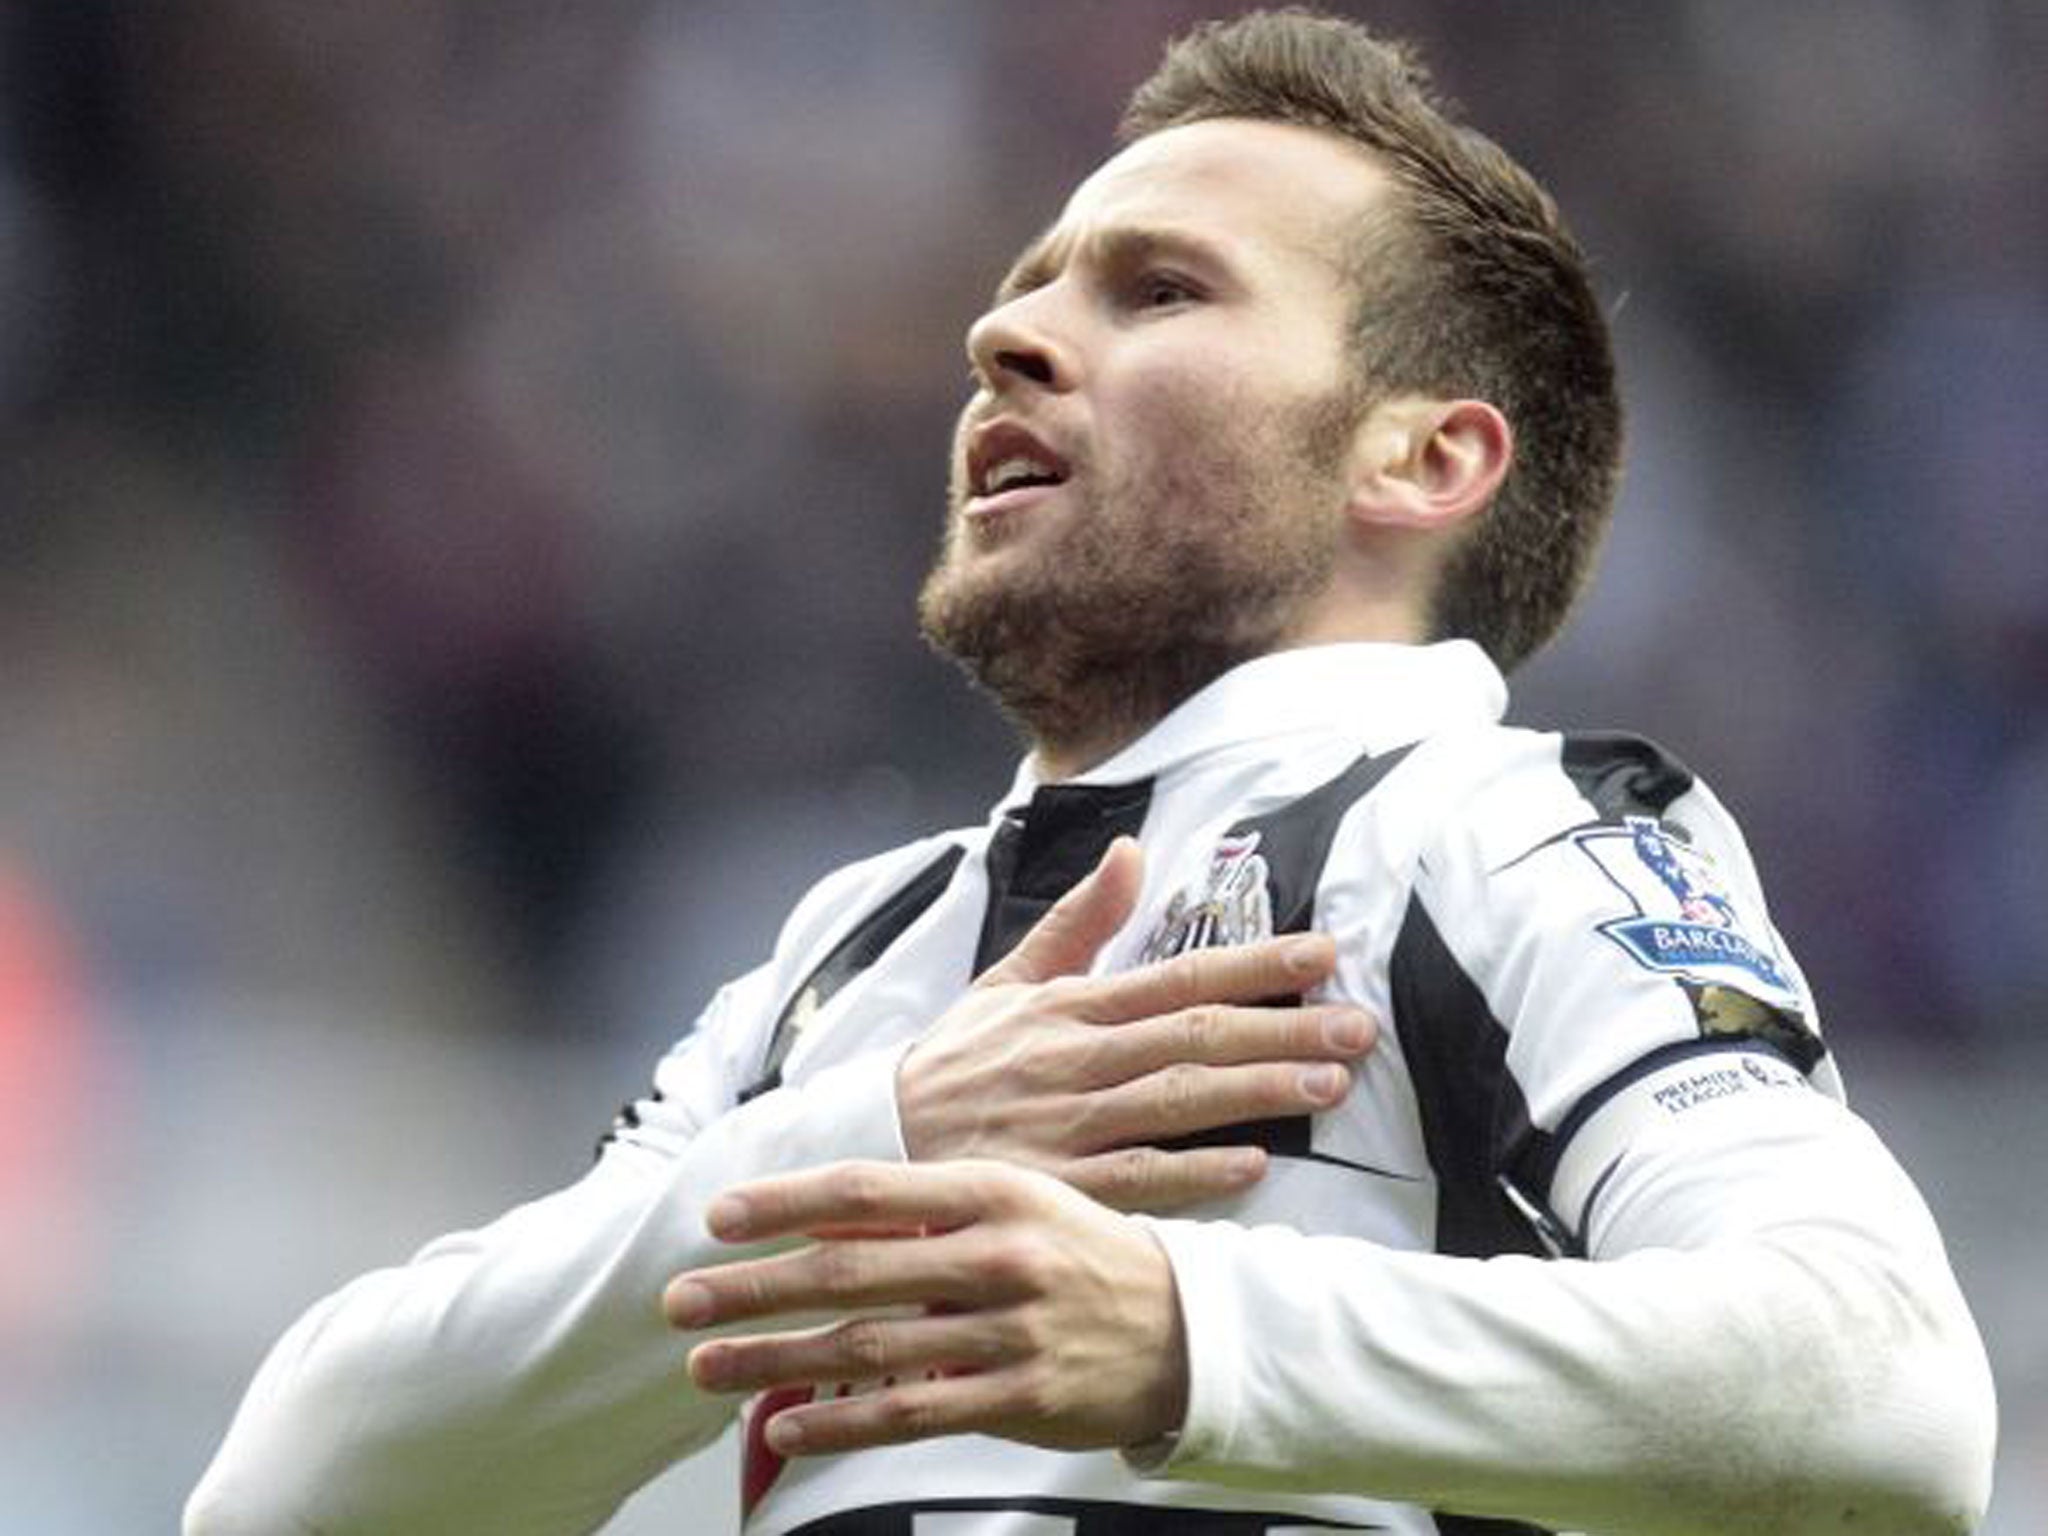 Yohan Cabaye has said he would be interested in a move to United